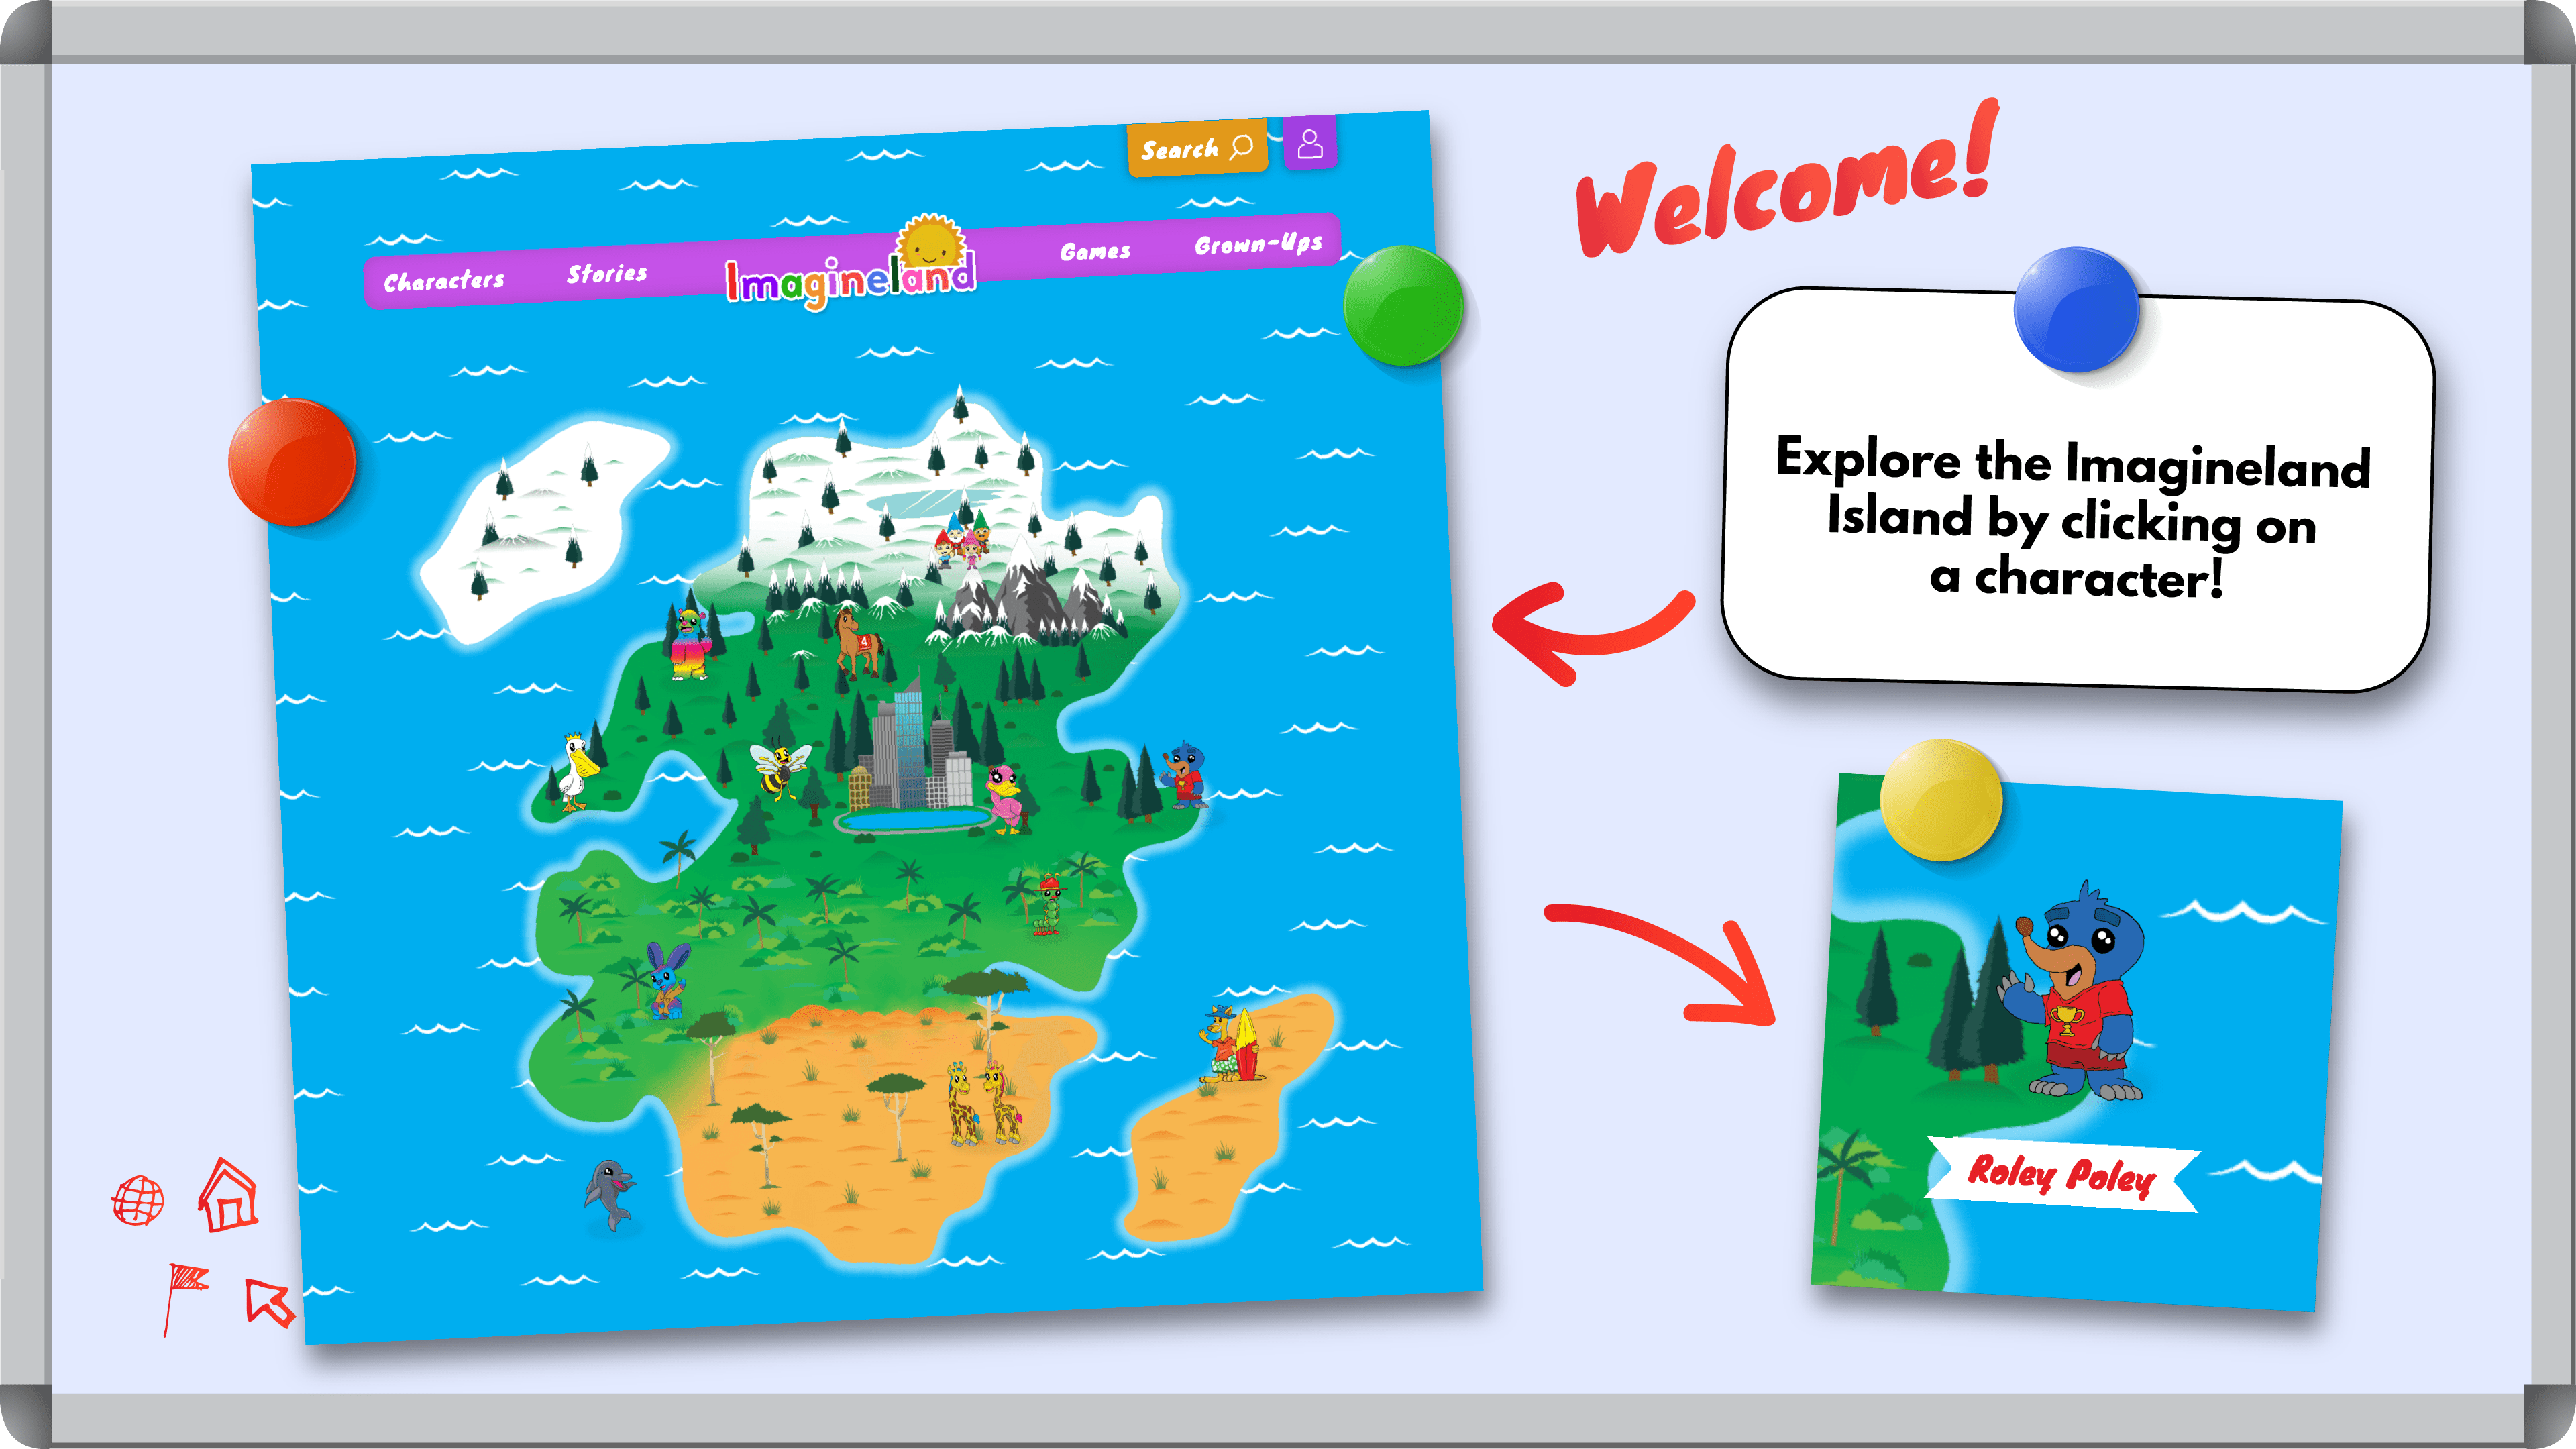 White board showing the Imagineland Island and Home page. Welcome to Imagineland, find your favourite character.